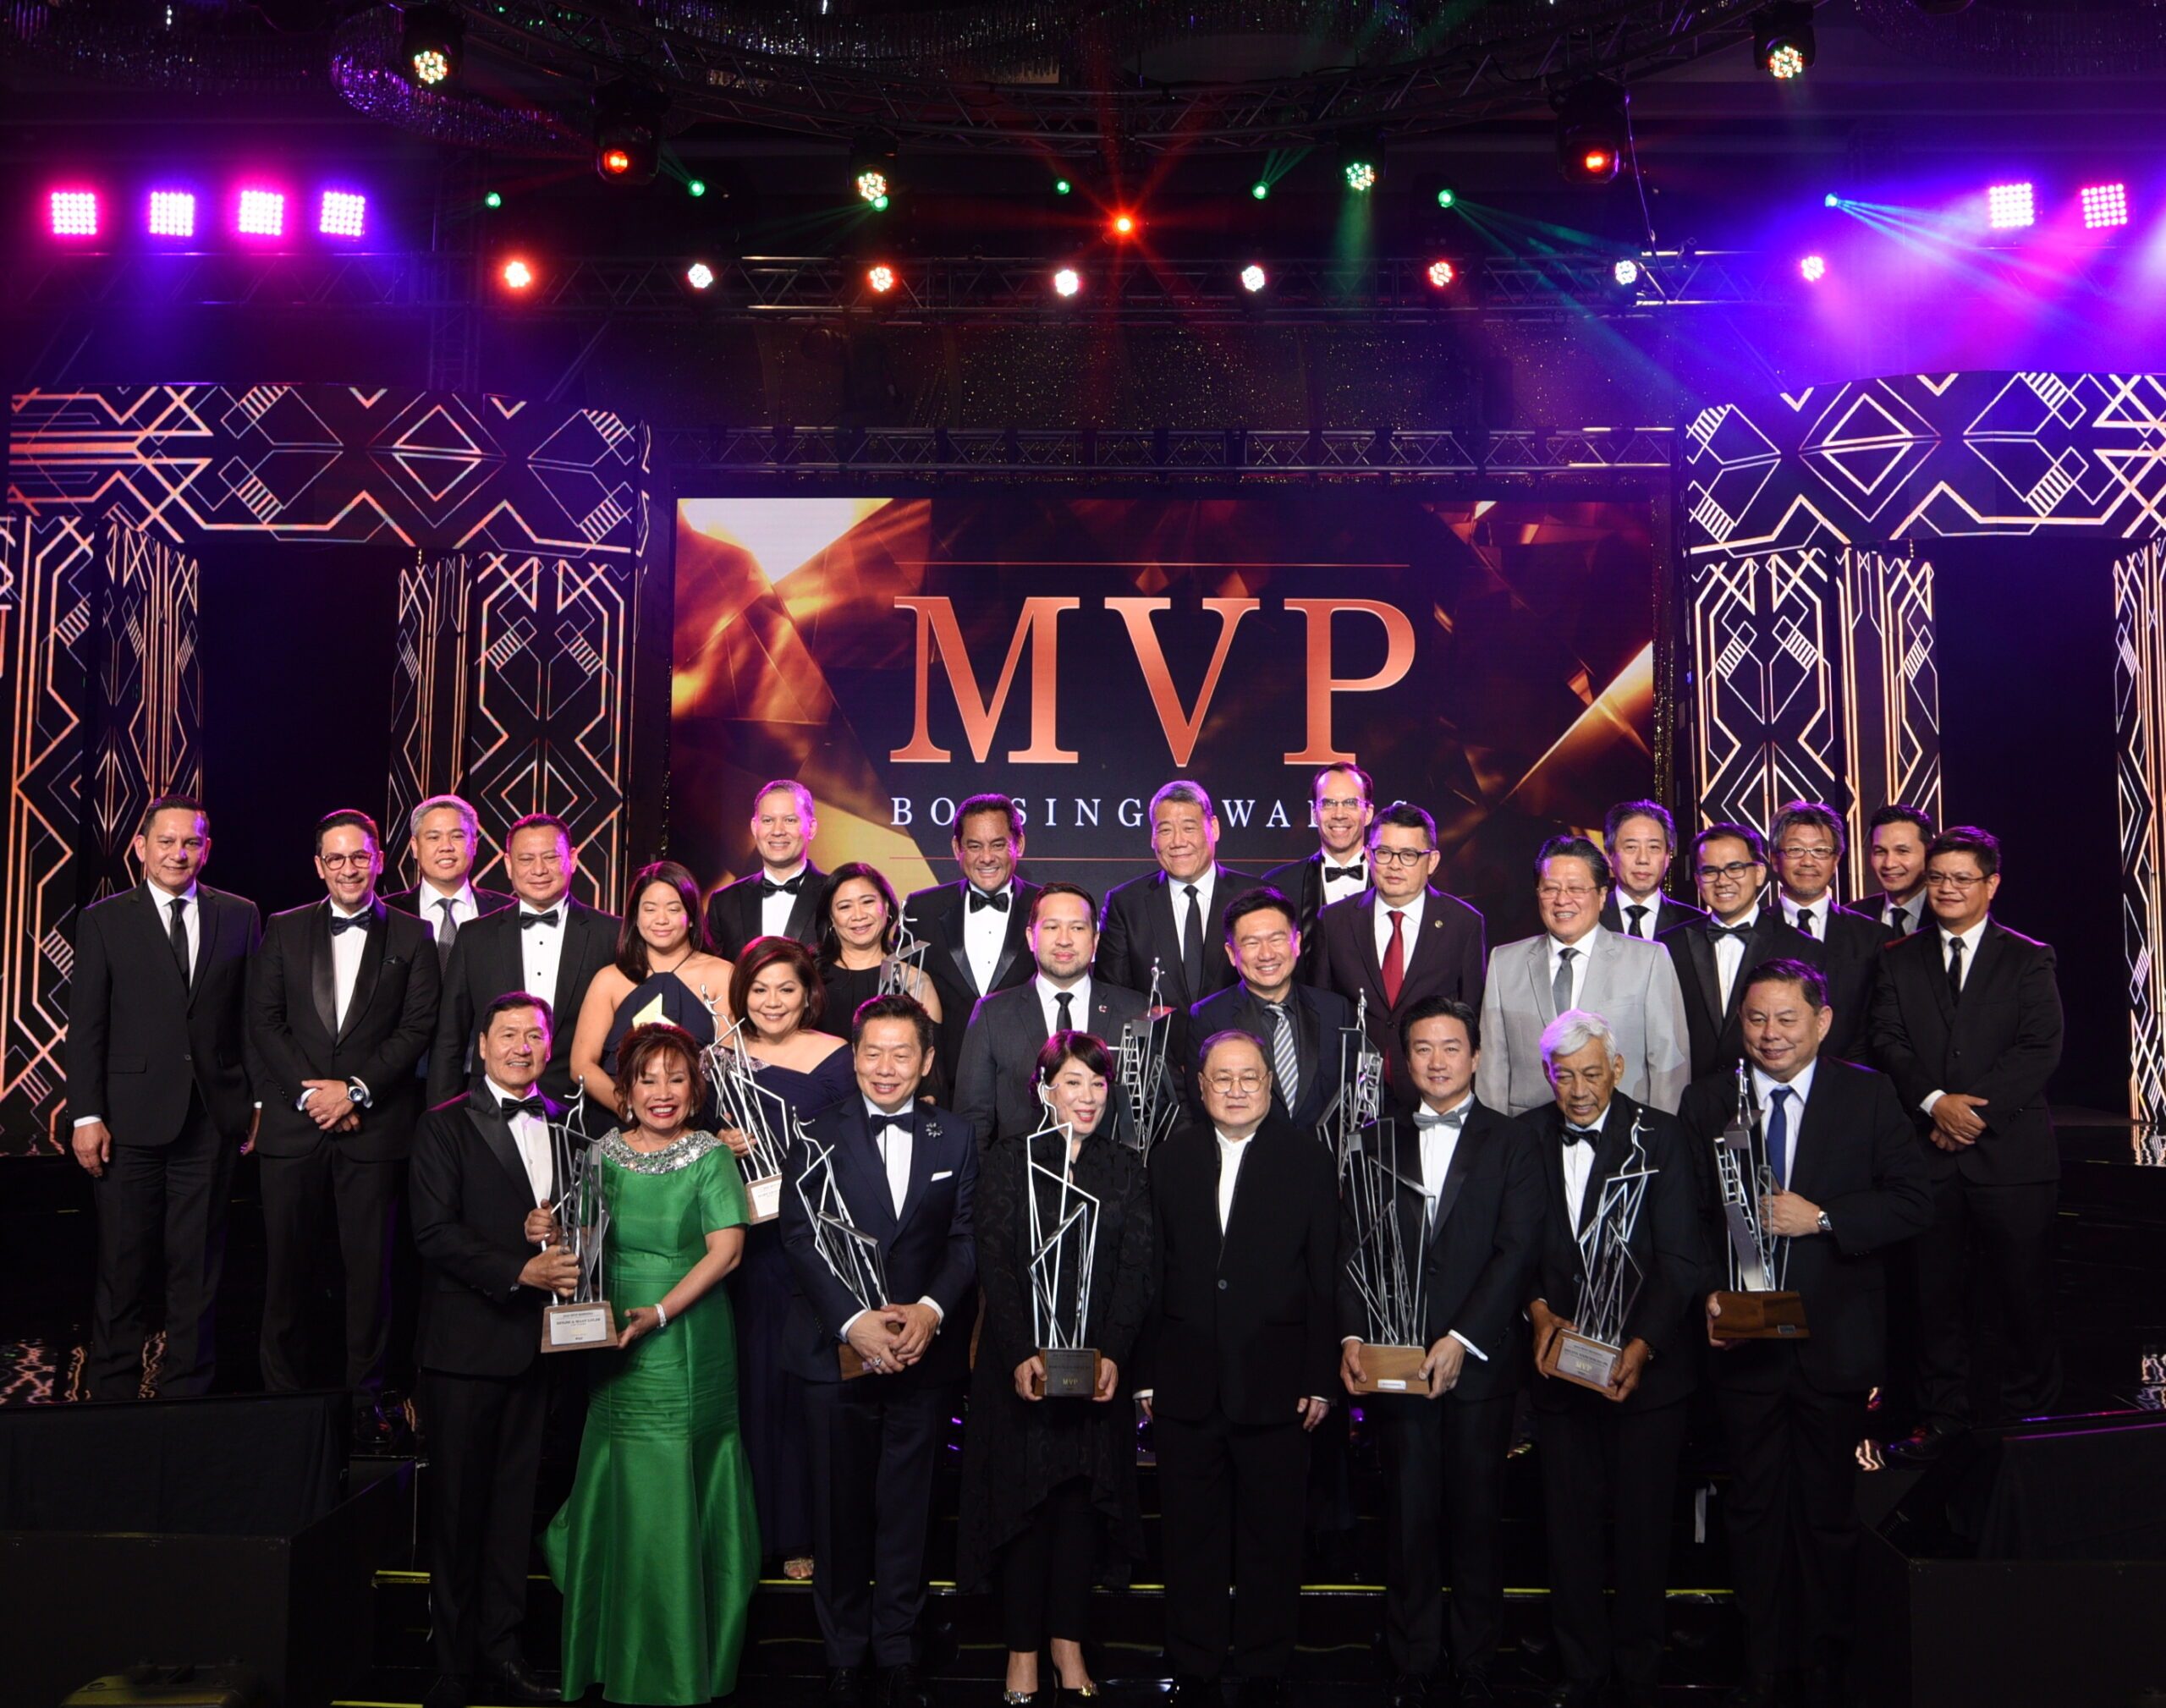 Here are the winners of the 2018 MVP Bossing Awards